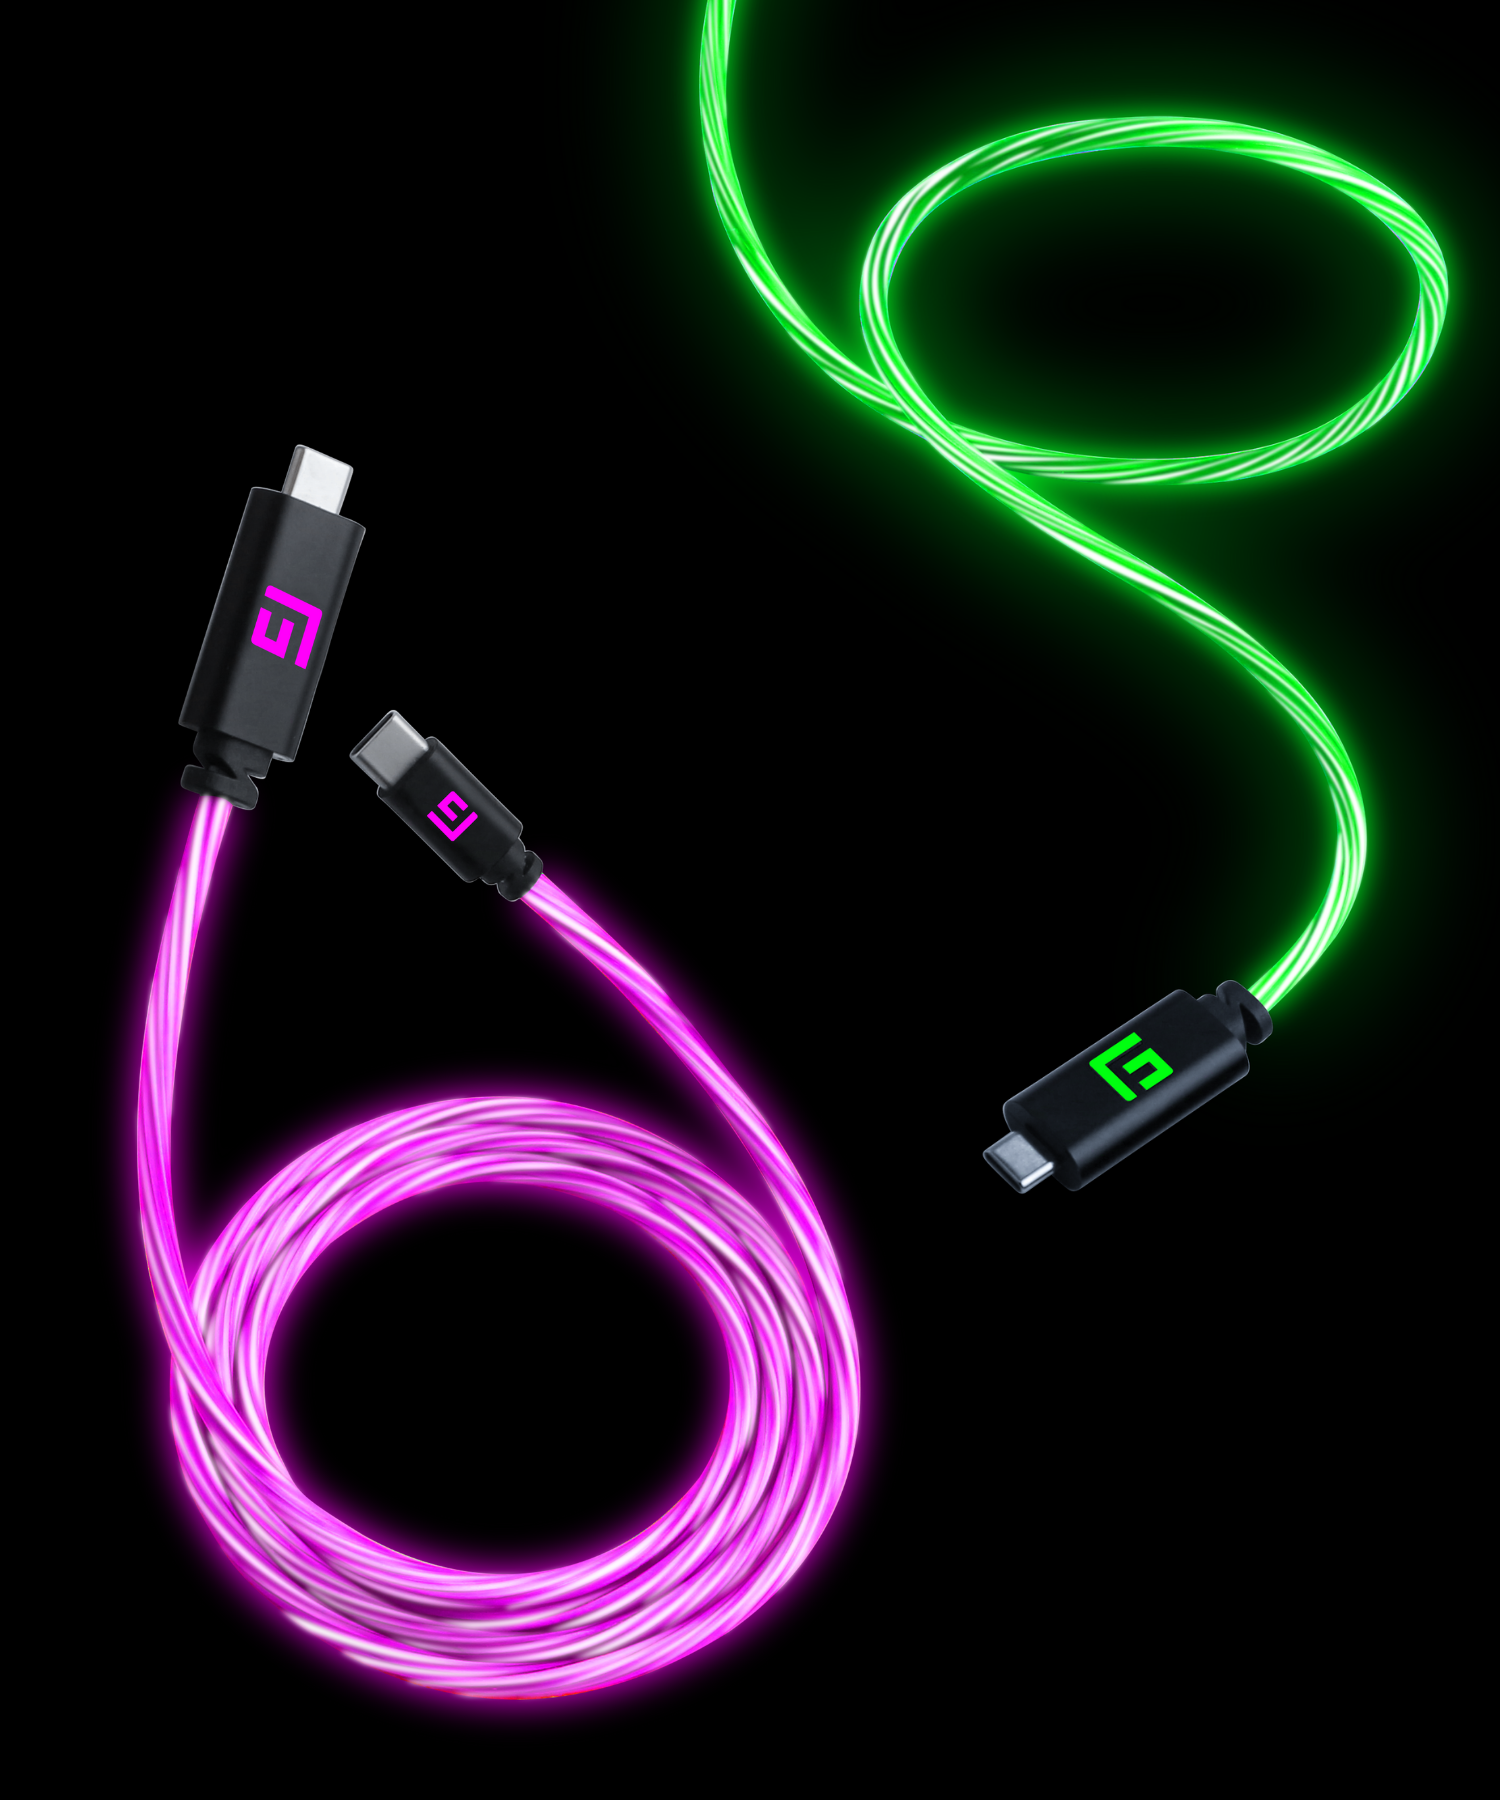 USB-C Cables with LED light